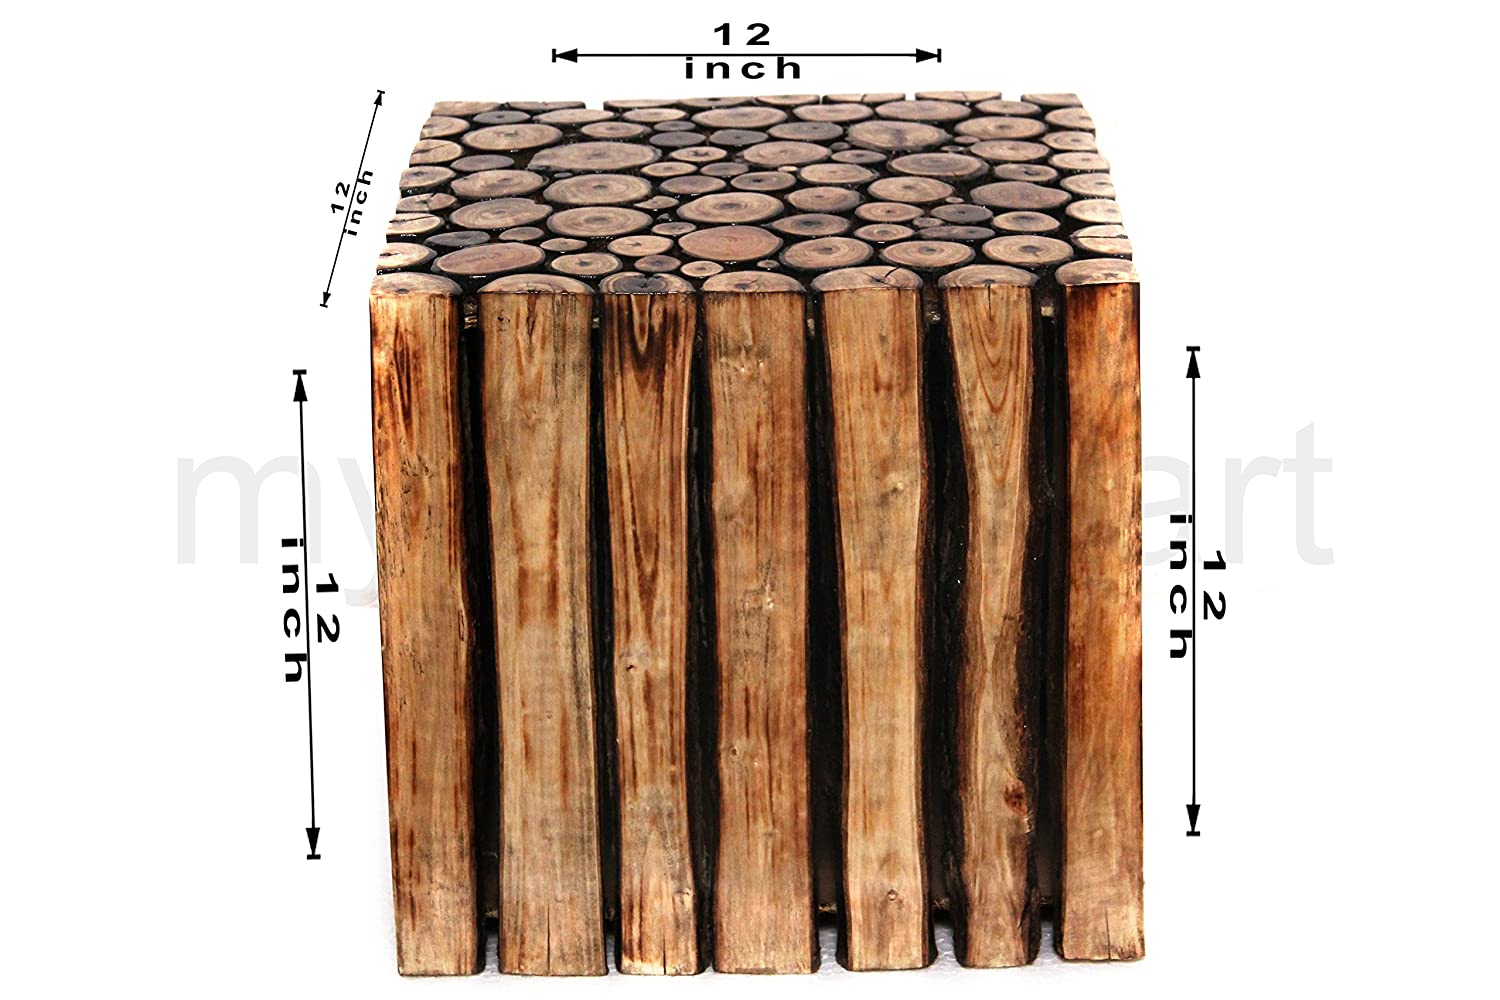 Square Wooden Stool Natural Wood Logs Best Used as Bedside Tea Coffee Plants Table for Bedroom Living Room Outdoor Garden Furniture